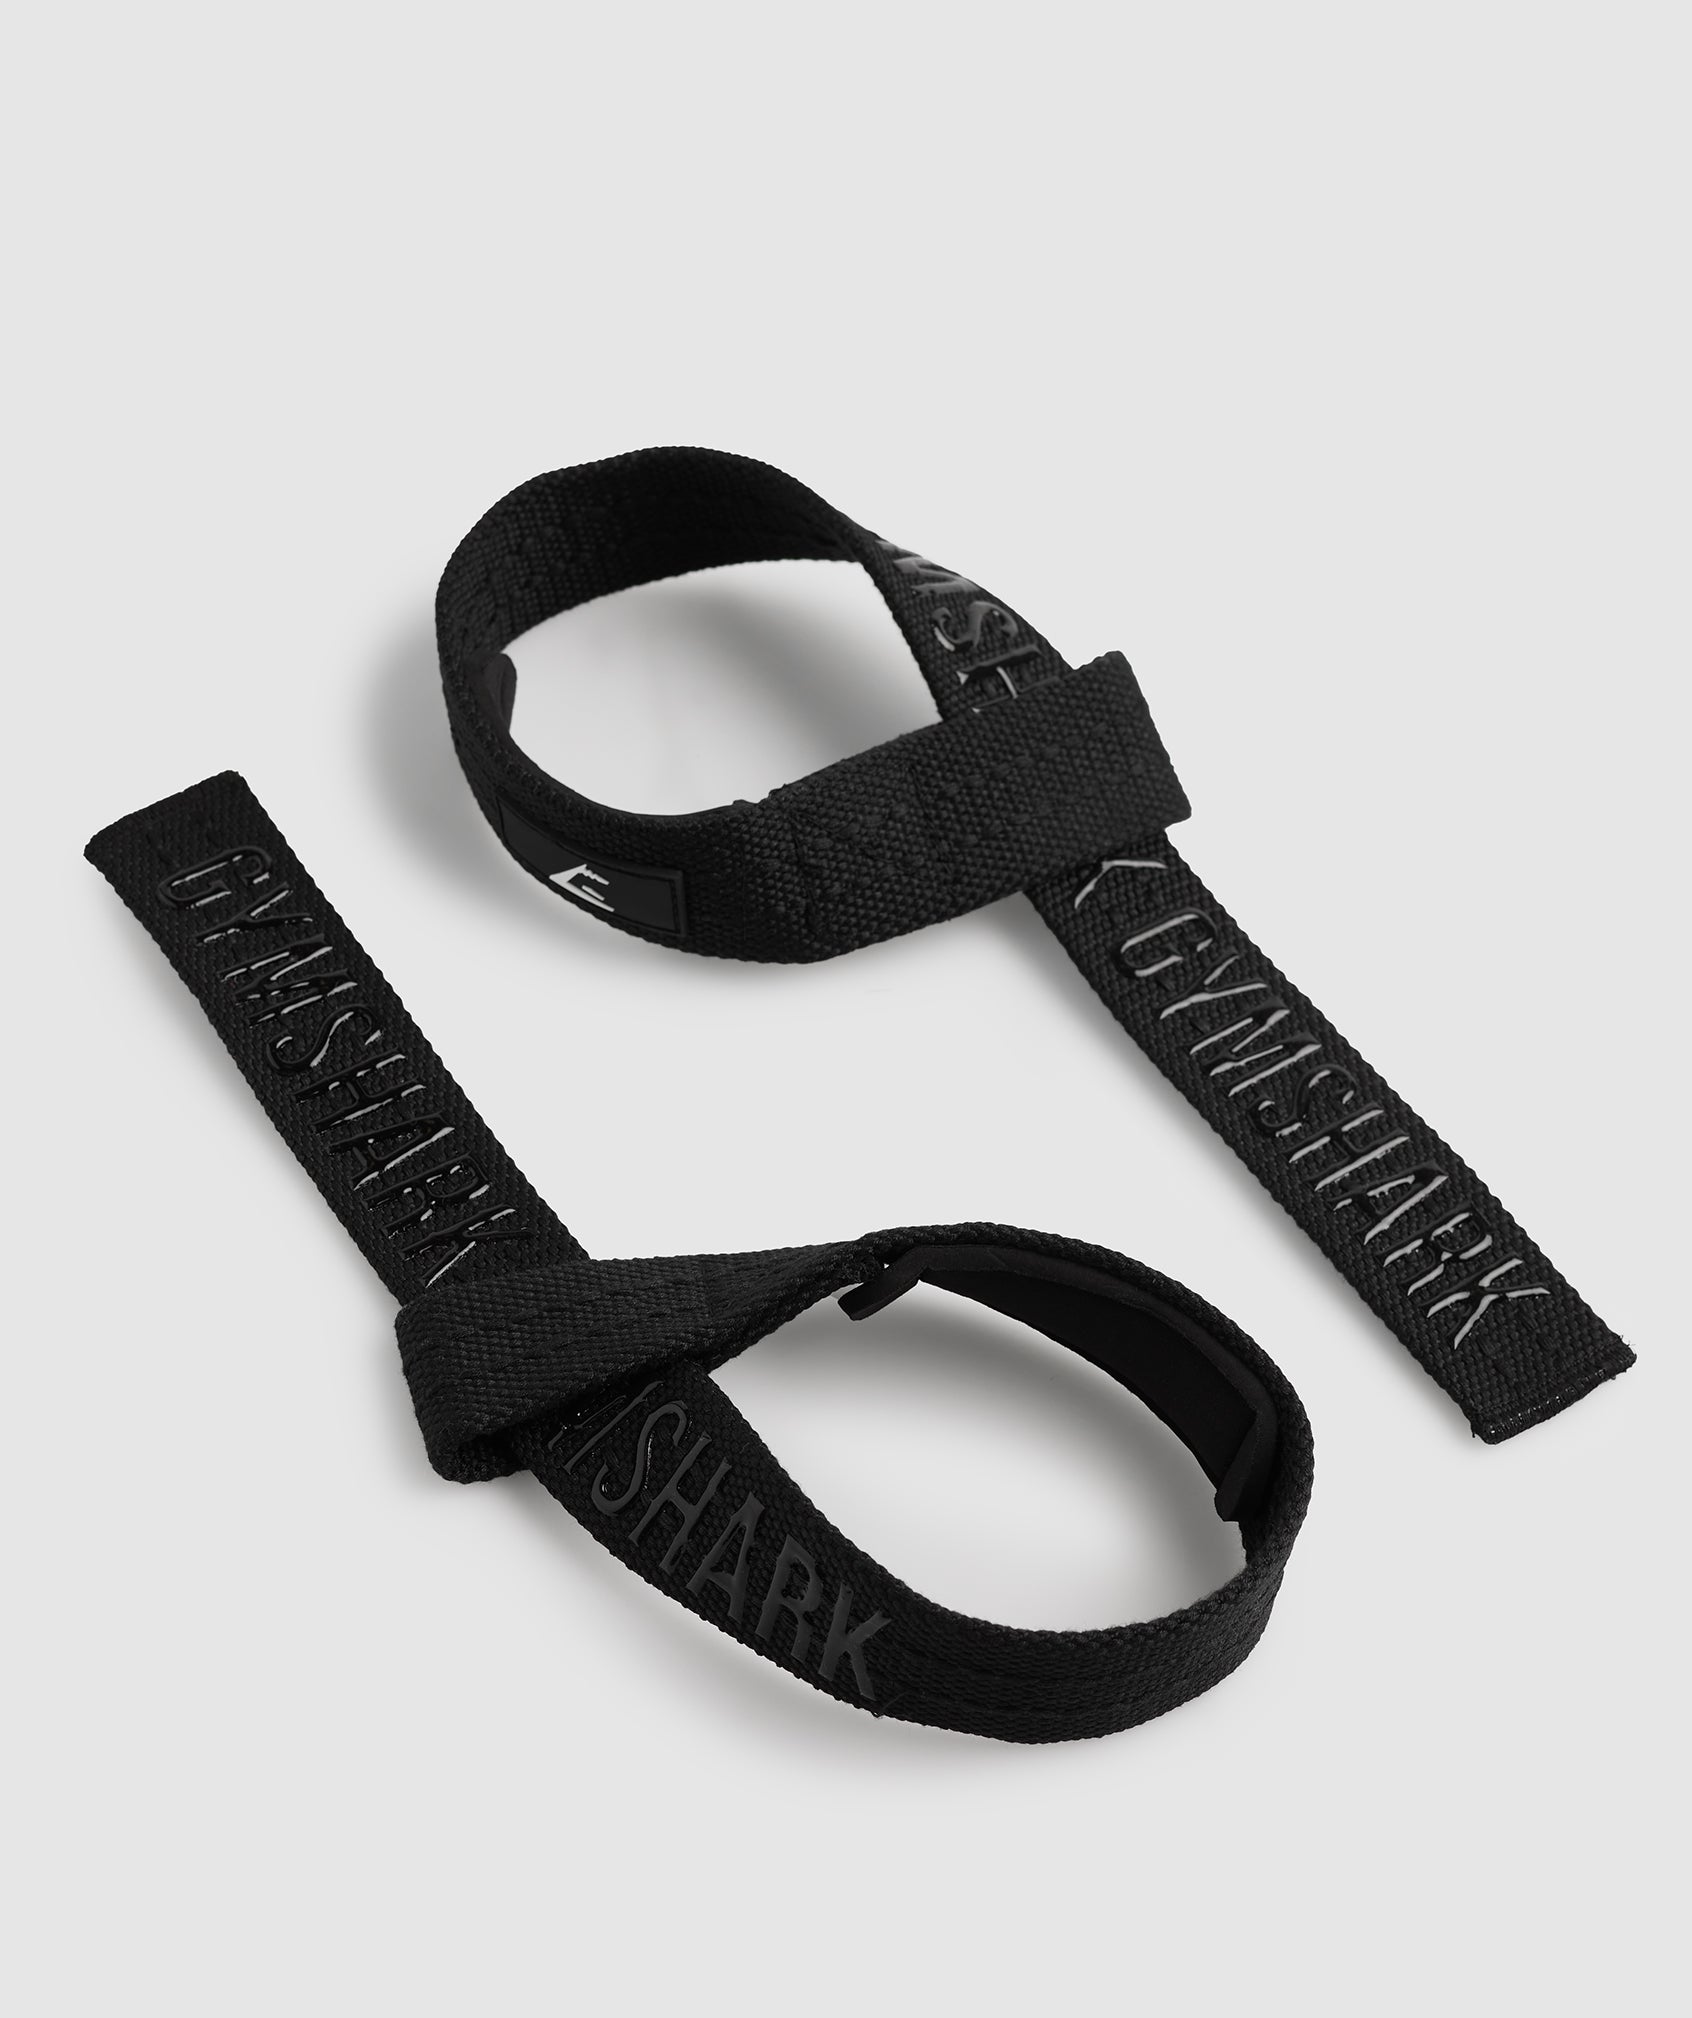 Gymshark Silicone Grip Lifting Straps - Black – Client 446 100K